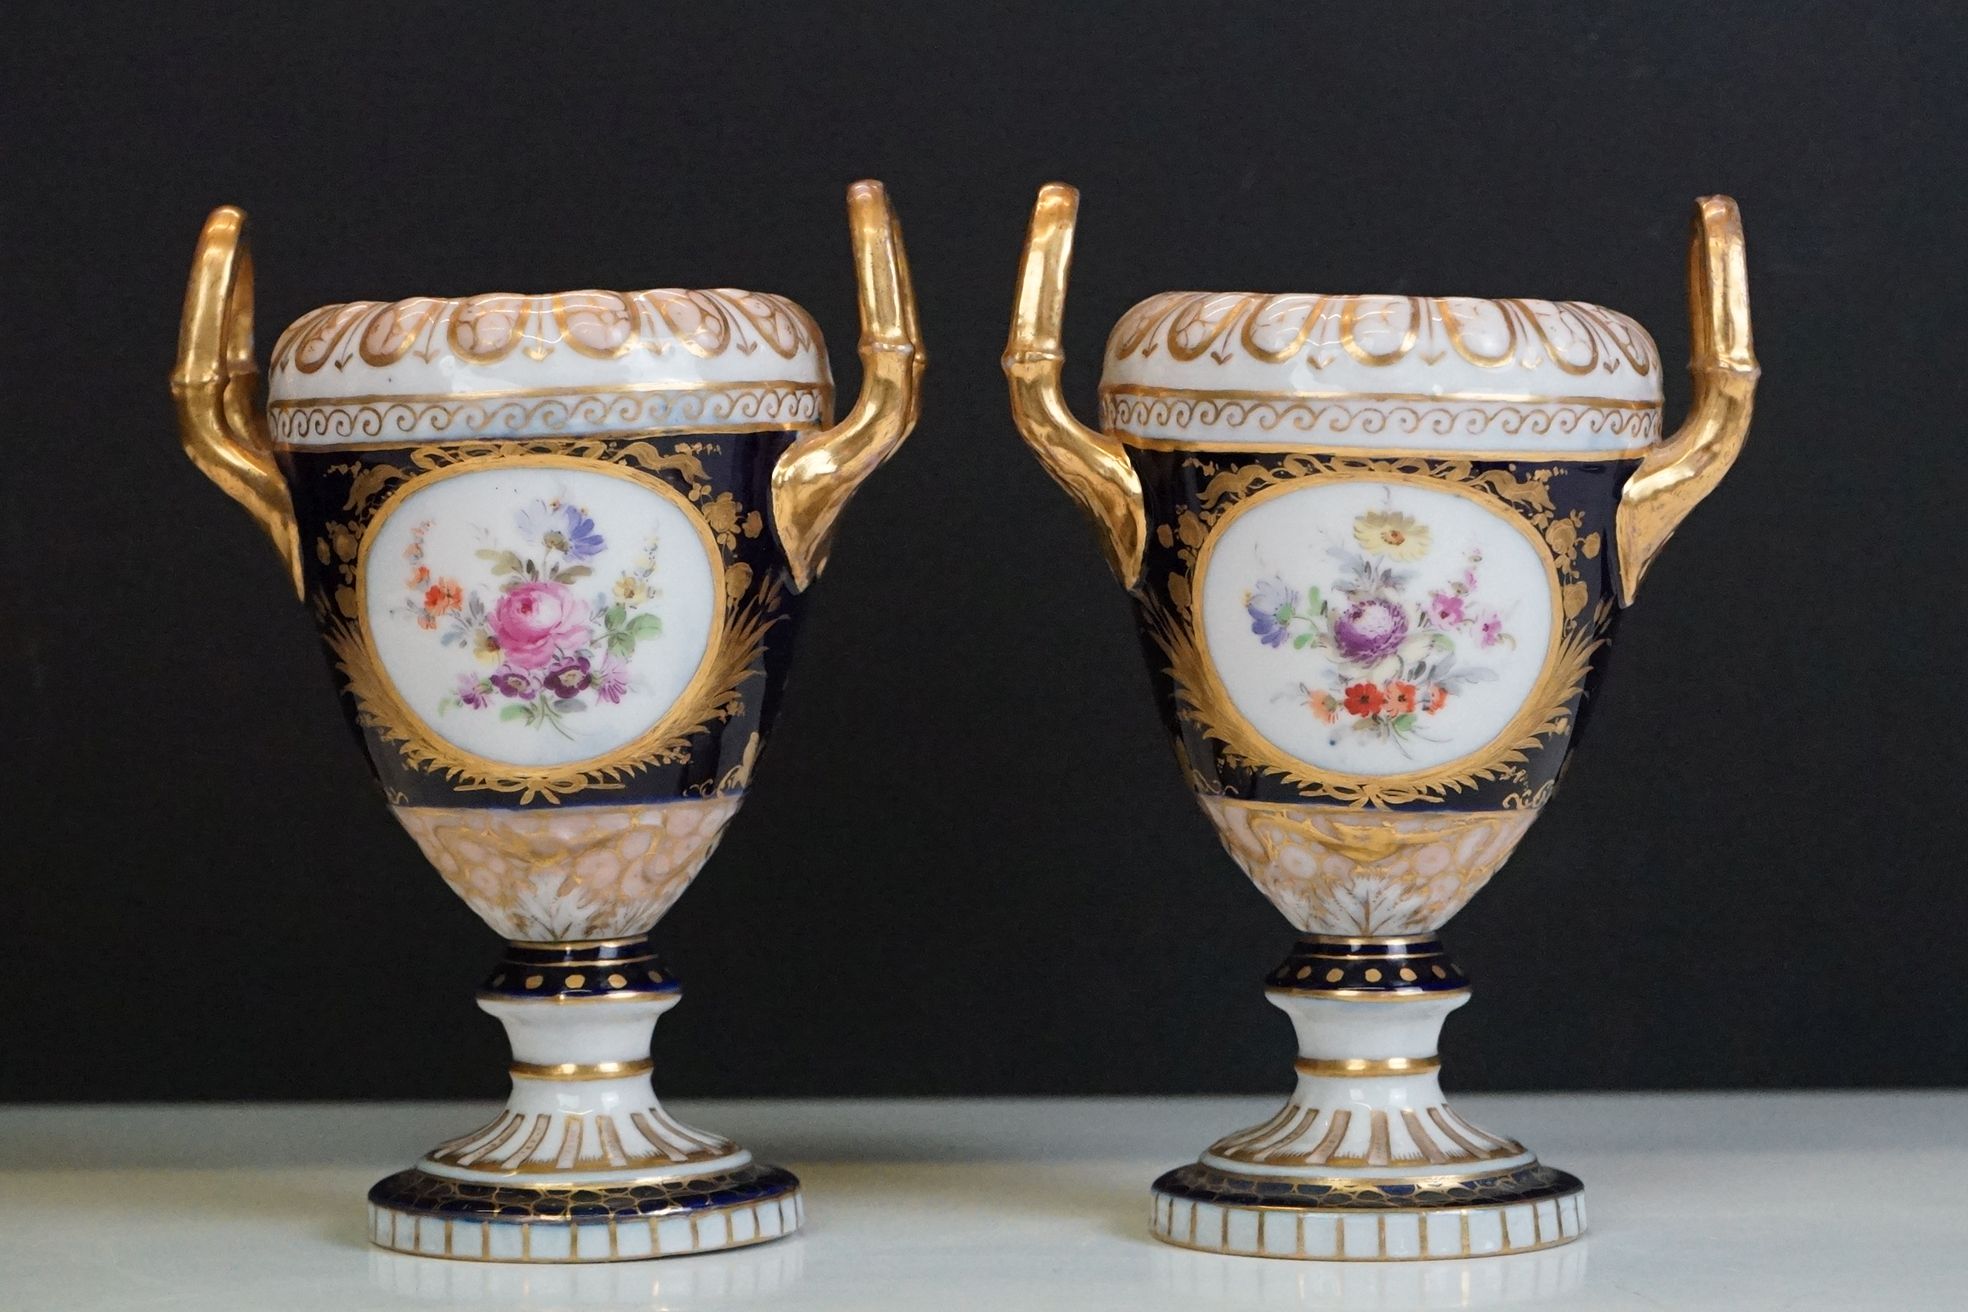 Pair of late 19th / early 20th century Continental porcelain twin-handled urn vases, with hand